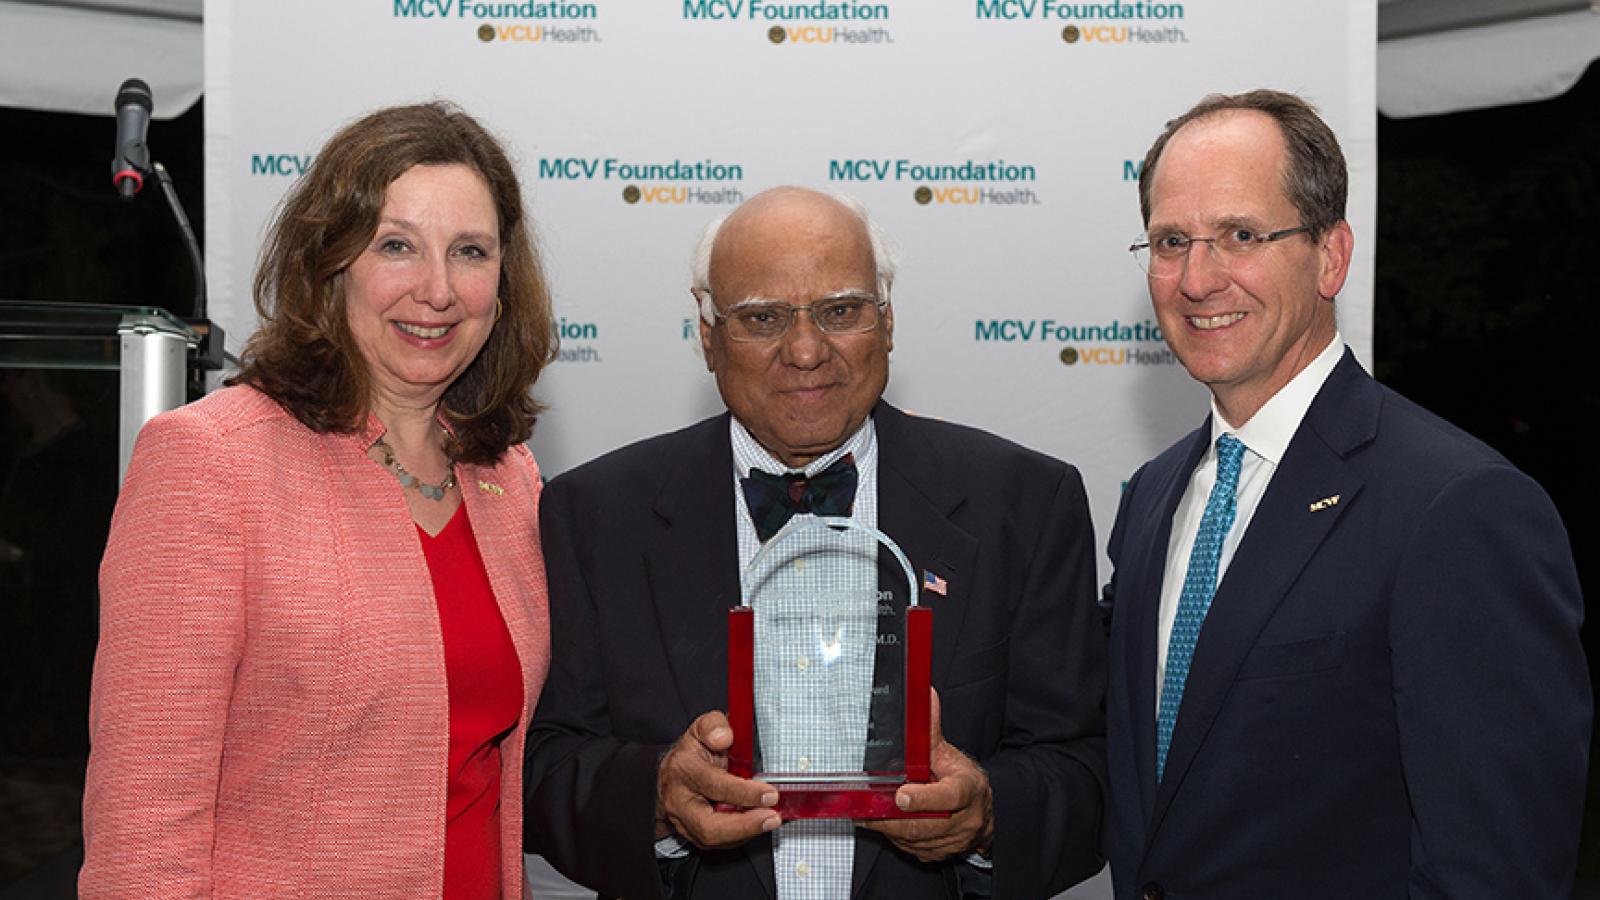 Ghulam Qureshi, M.D., with Margaret Ann Bollmeier, president and CEO of the MCV Foundation, and Wyatt Beazley IV, the foundation's board chair.